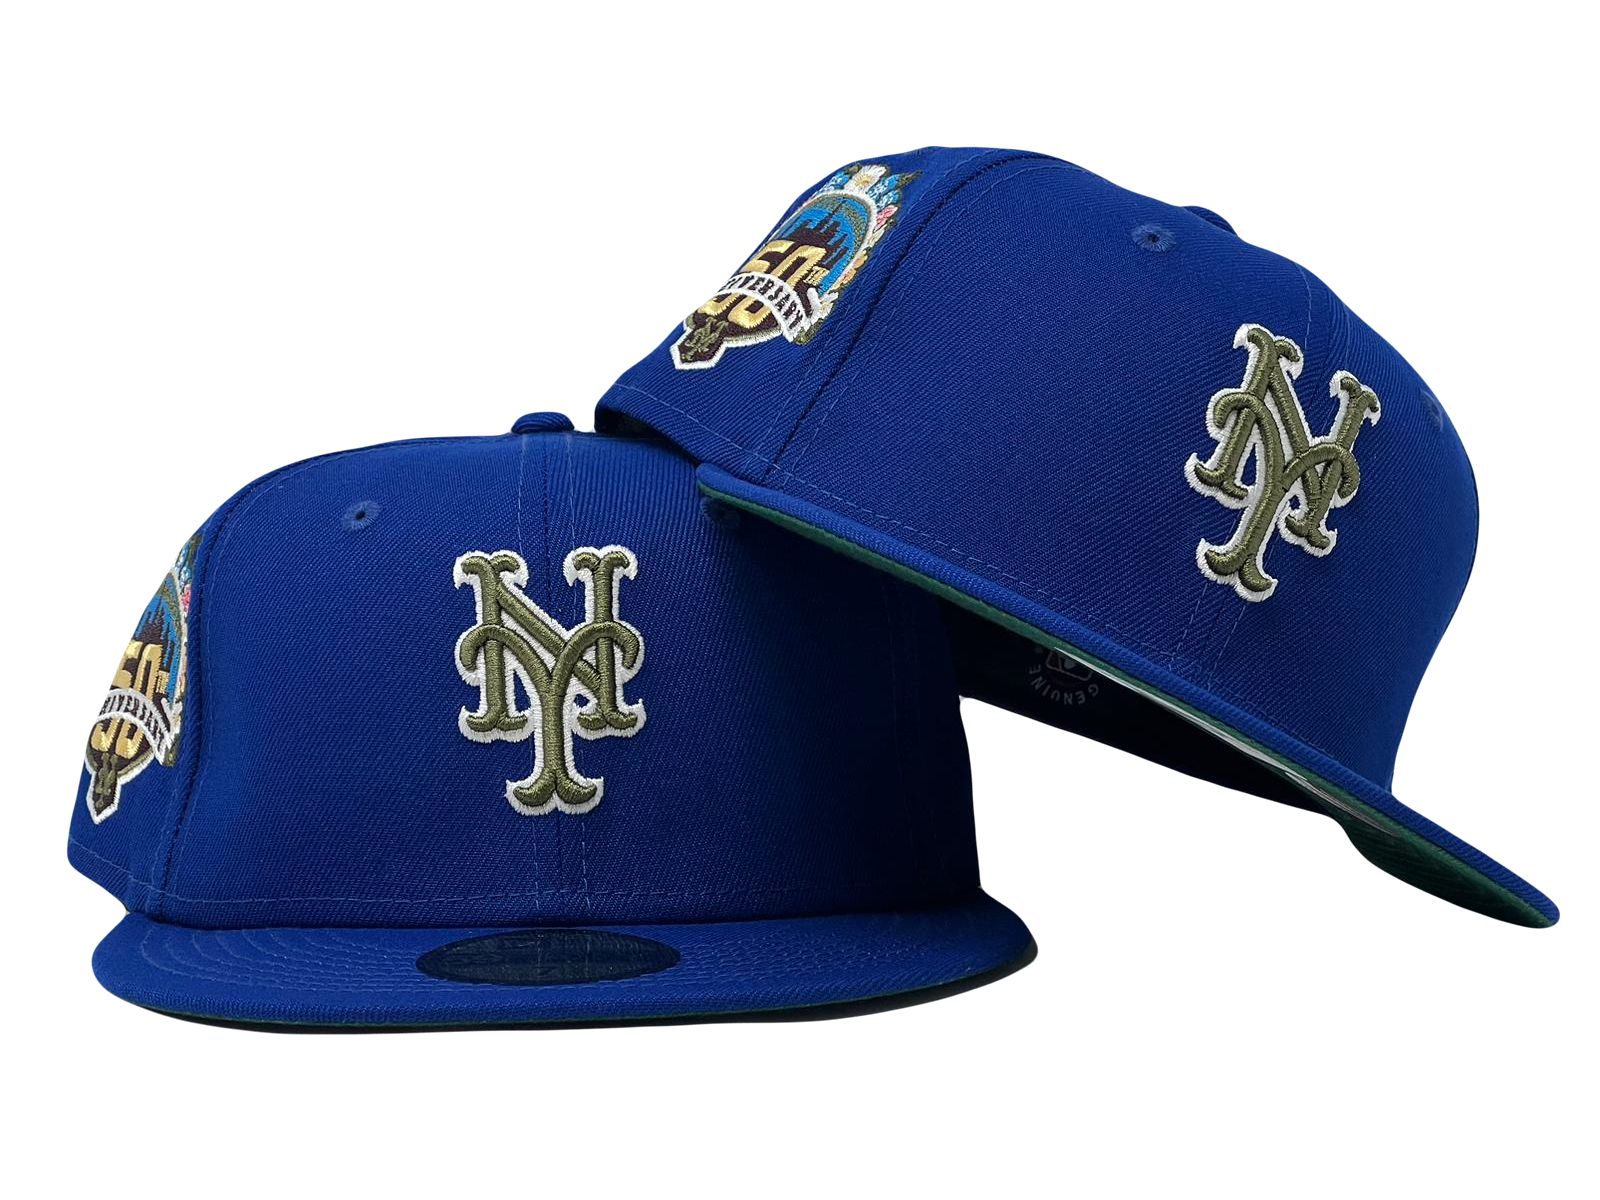  New York Mets New Era 50th Anniversary 59FIFTY Fitted Hat  - Light Blue